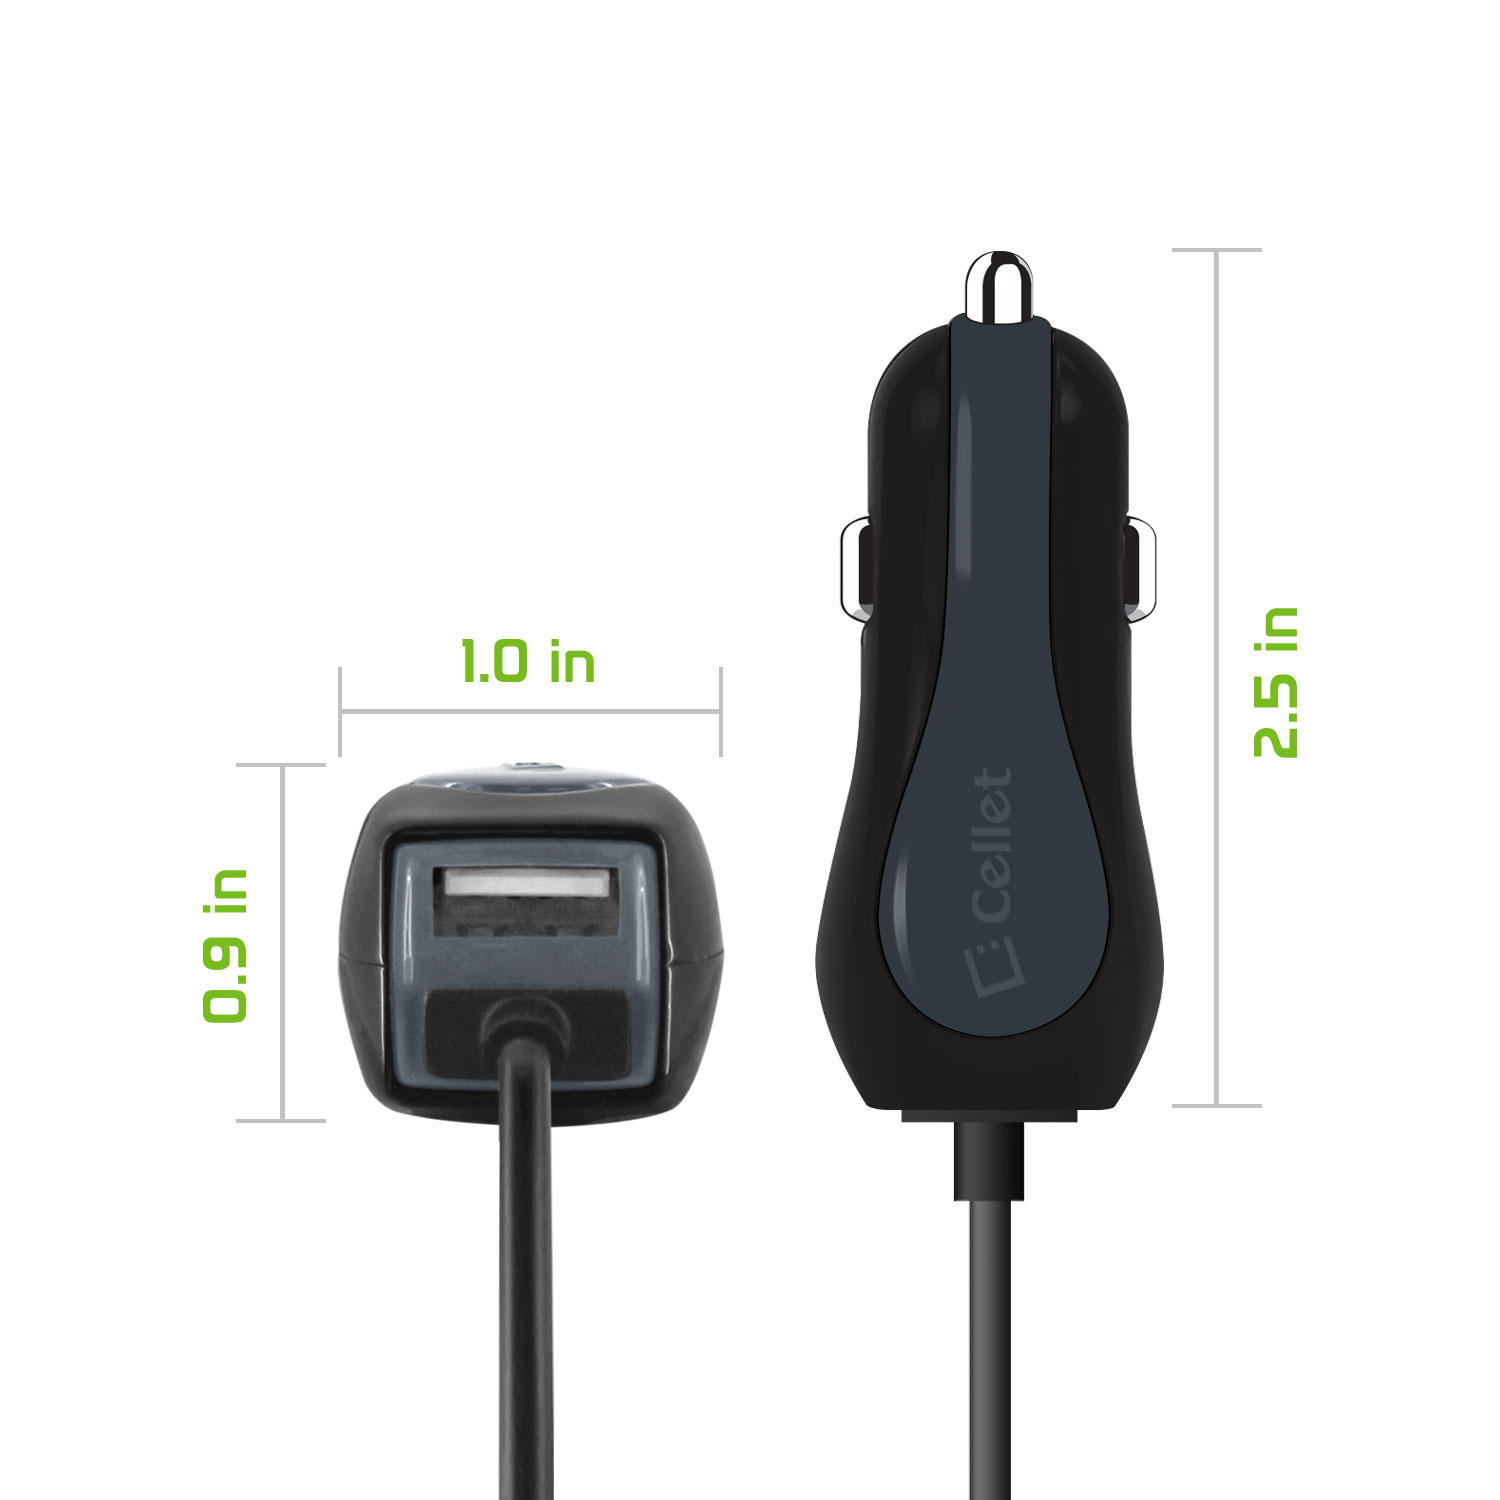 Samsung Galaxy S9 / S9+ Plus Type C Car Charger - [15 Watt / 3 Amp] High Powered USB Type-C (USB-C) Car Charger with Extra USB Port [6 feet] and Atom Cloth for Samsung Galaxy S9 / S9+ Plus - image 5 of 9